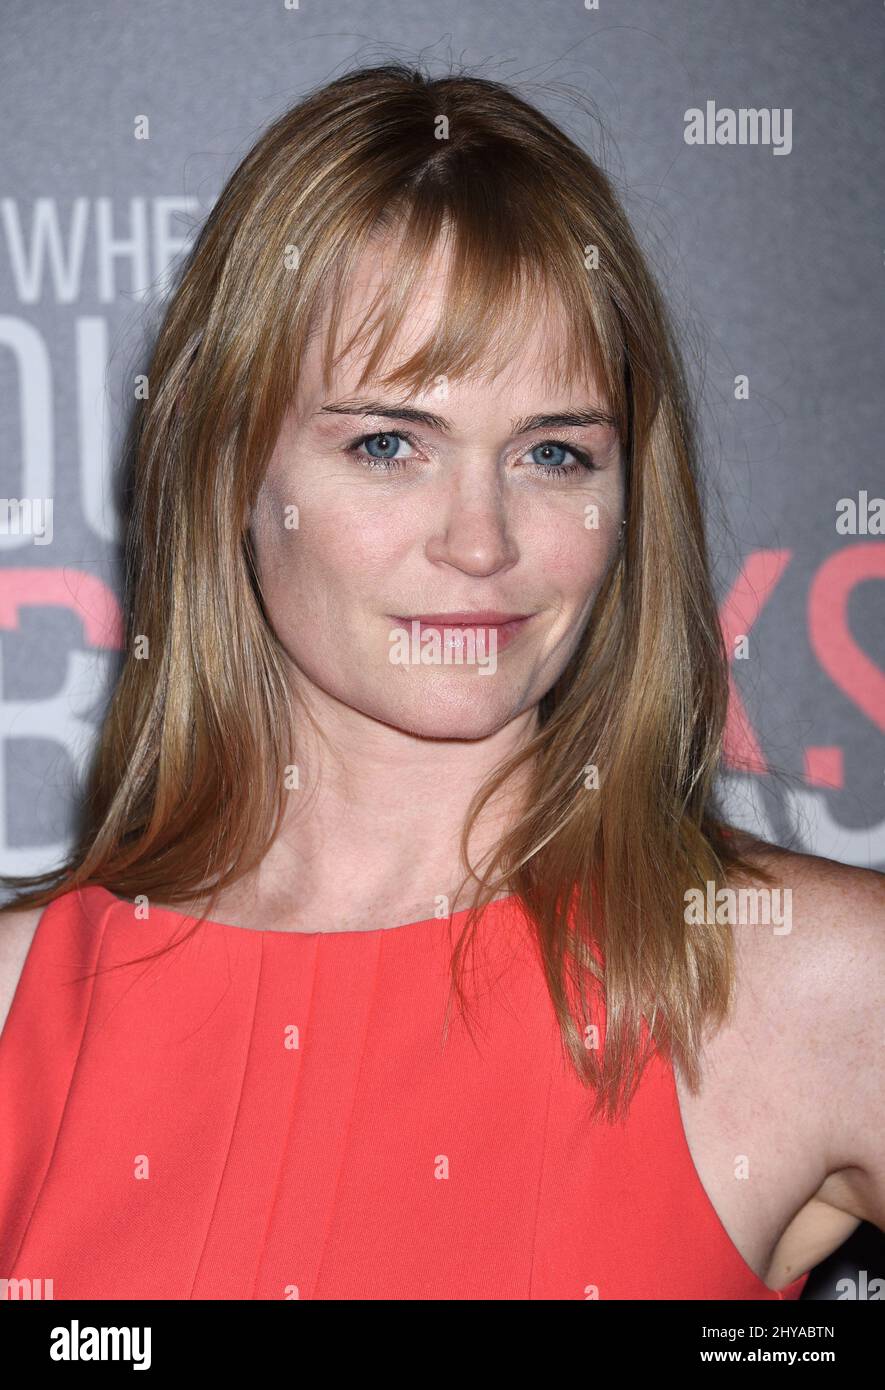 Sprague Grayden arriving for the 'When The Bough Breaks' World Premiere held at the Regal Cinemas L.A. LIVE, Los Angeles, 28th August 2016. Stock Photo